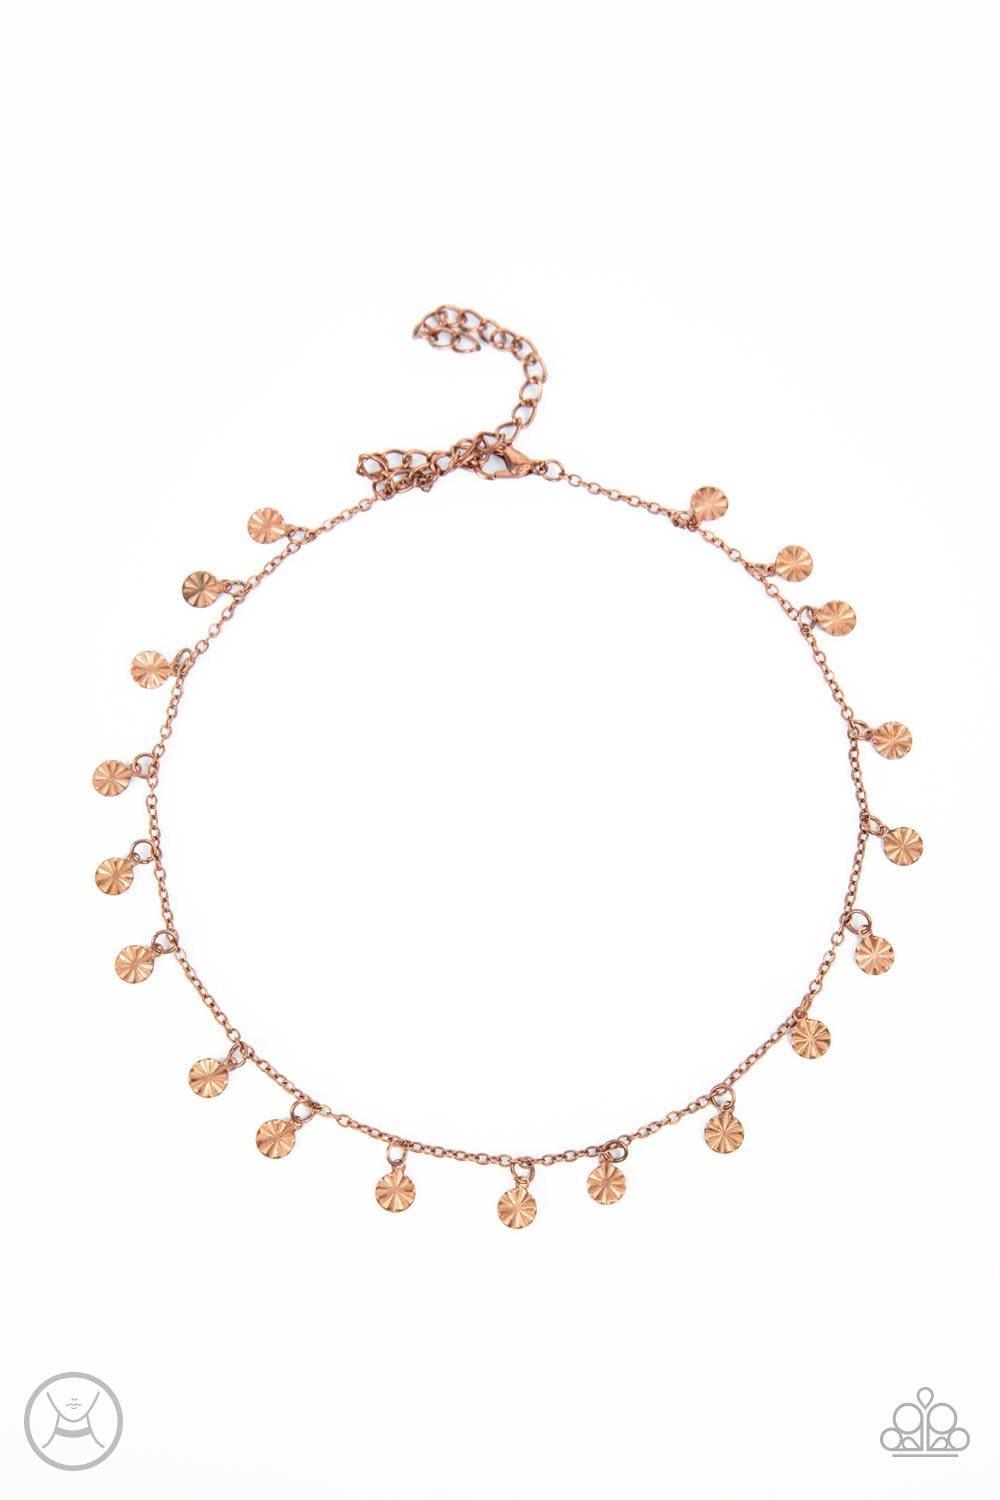 Paparazzi Accessories - Chiming Charmer - Copper Choker Necklace - Bling by JessieK